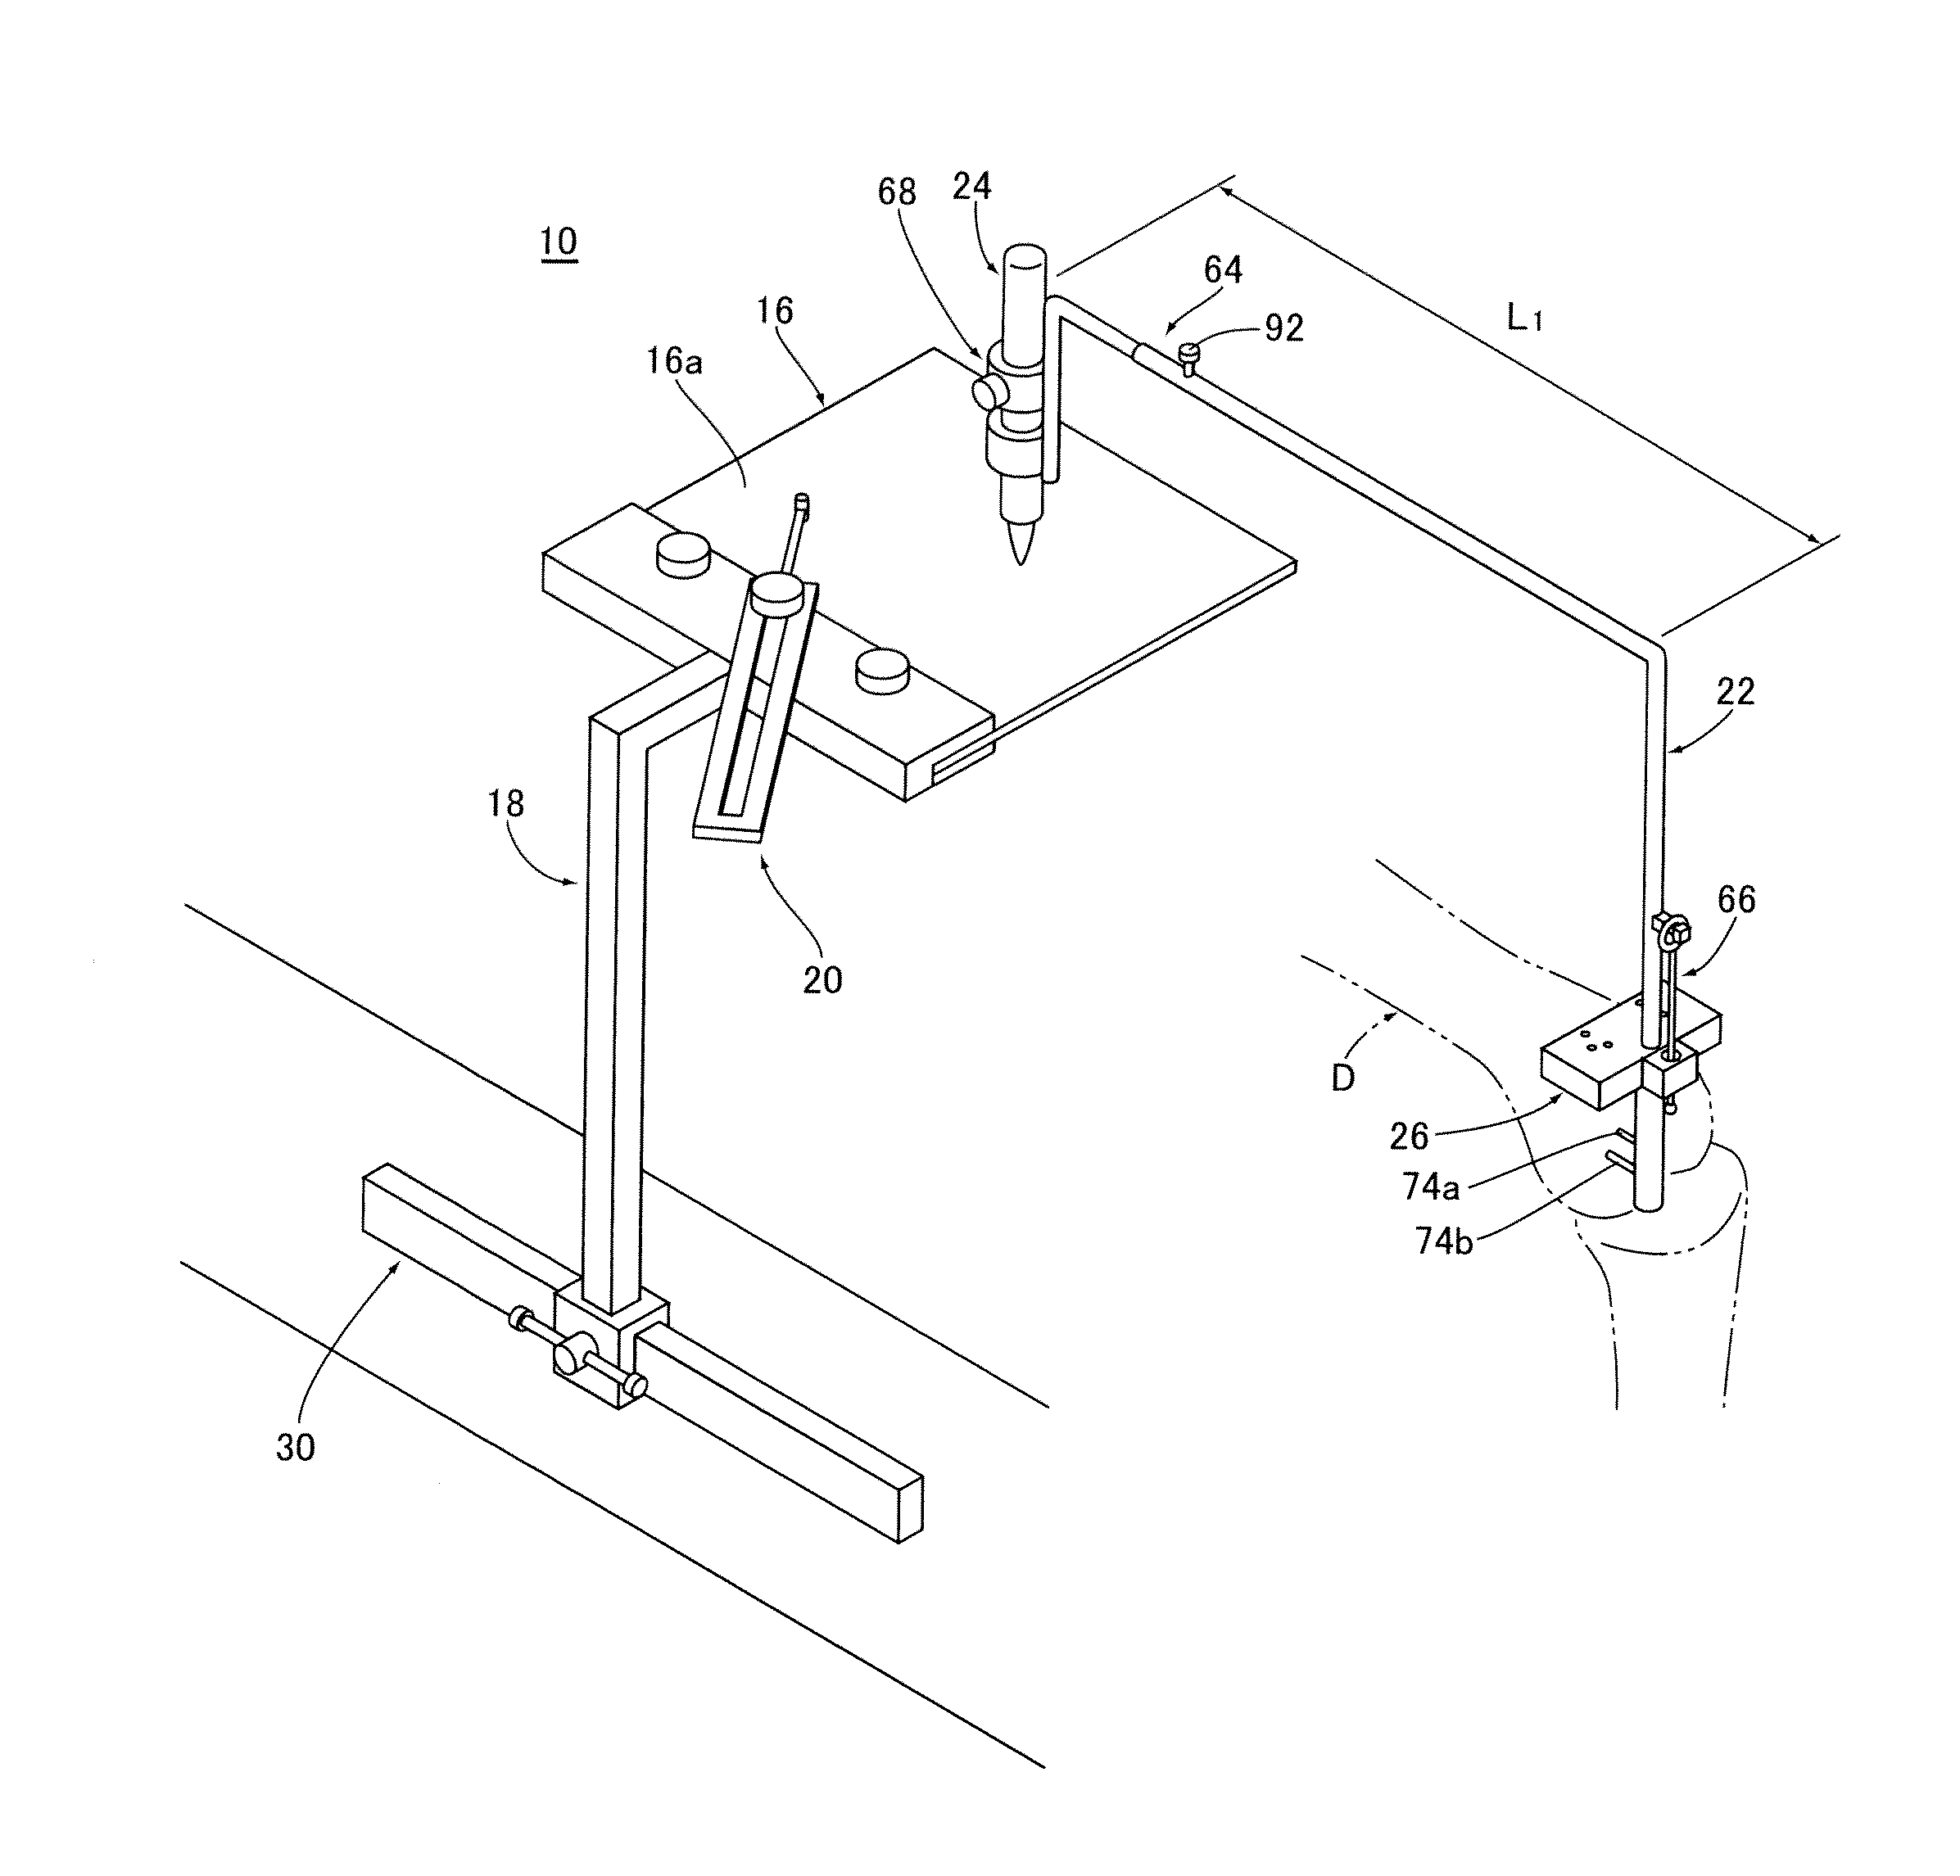 Apparatus for Identifying Femoral Head Center